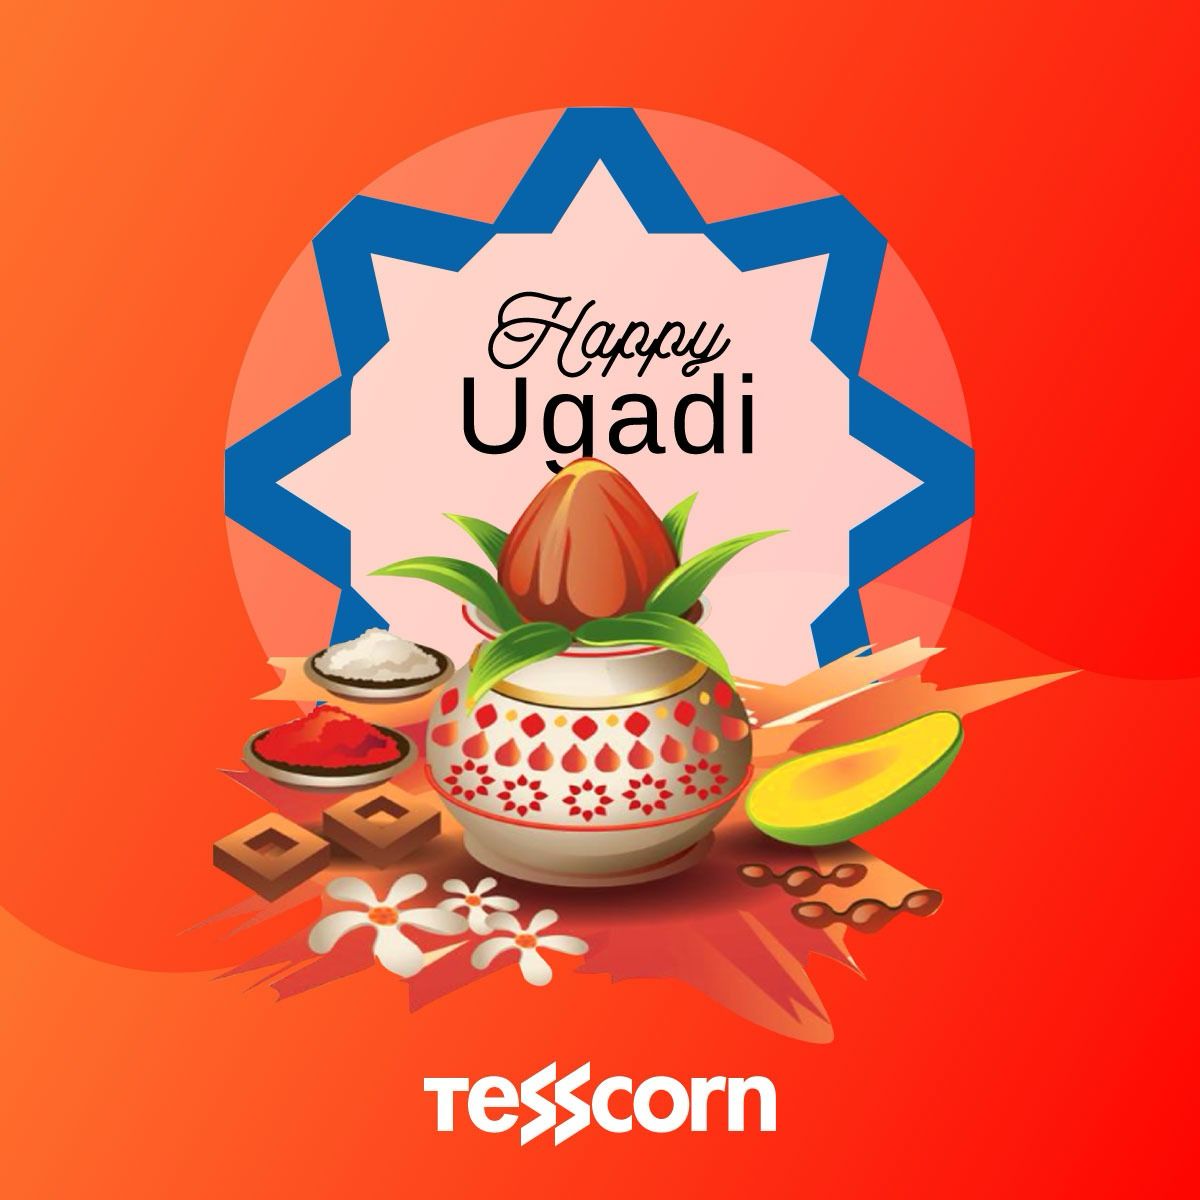 #HappyUgadi to all of you out there. We thought we would extend our festive greetings before the traffic really gets heavy. ☺️ #Tesscorn